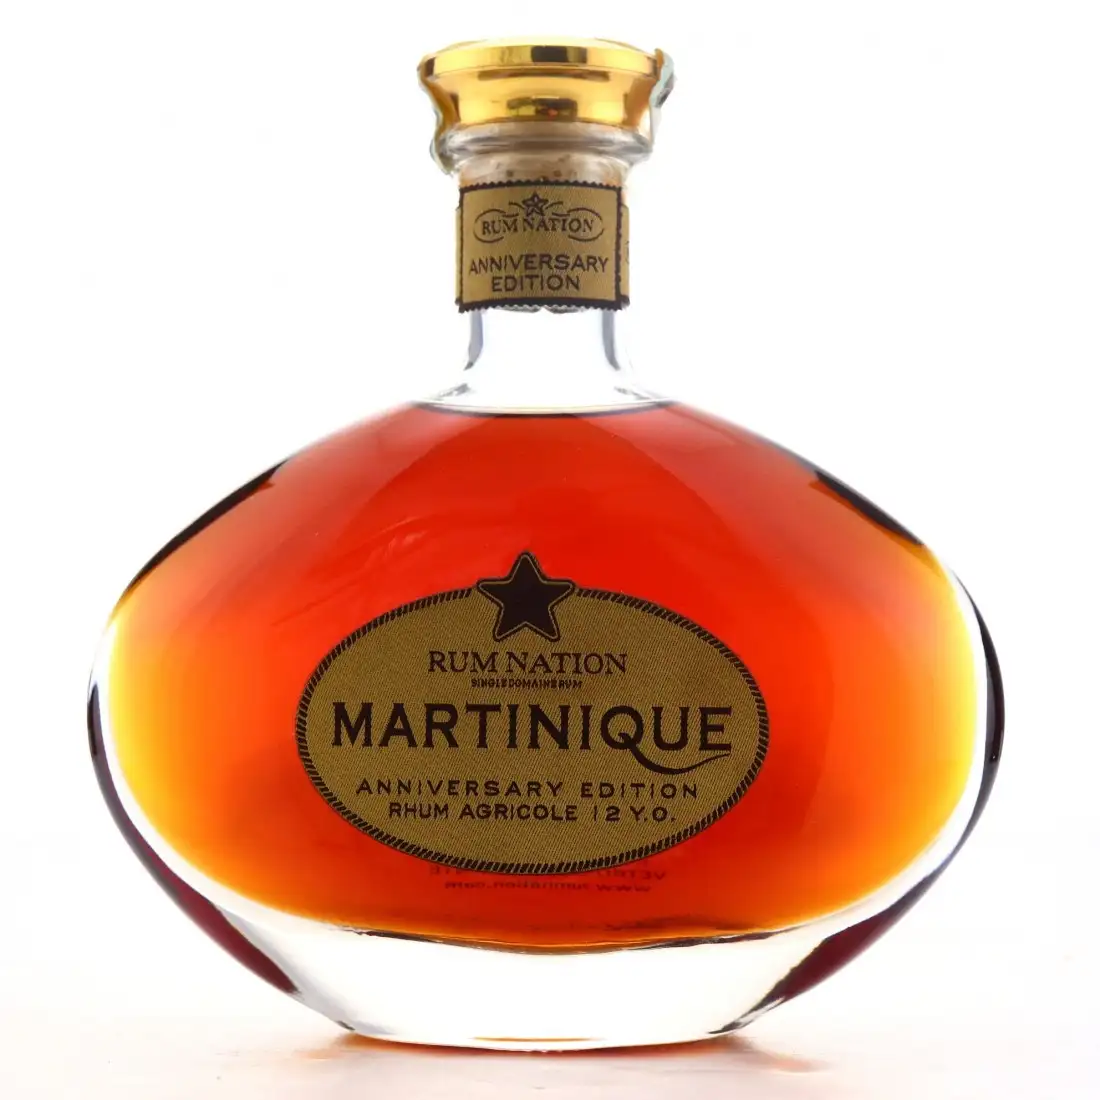 Image of the front of the bottle of the rum Martinique Anniversary Edition